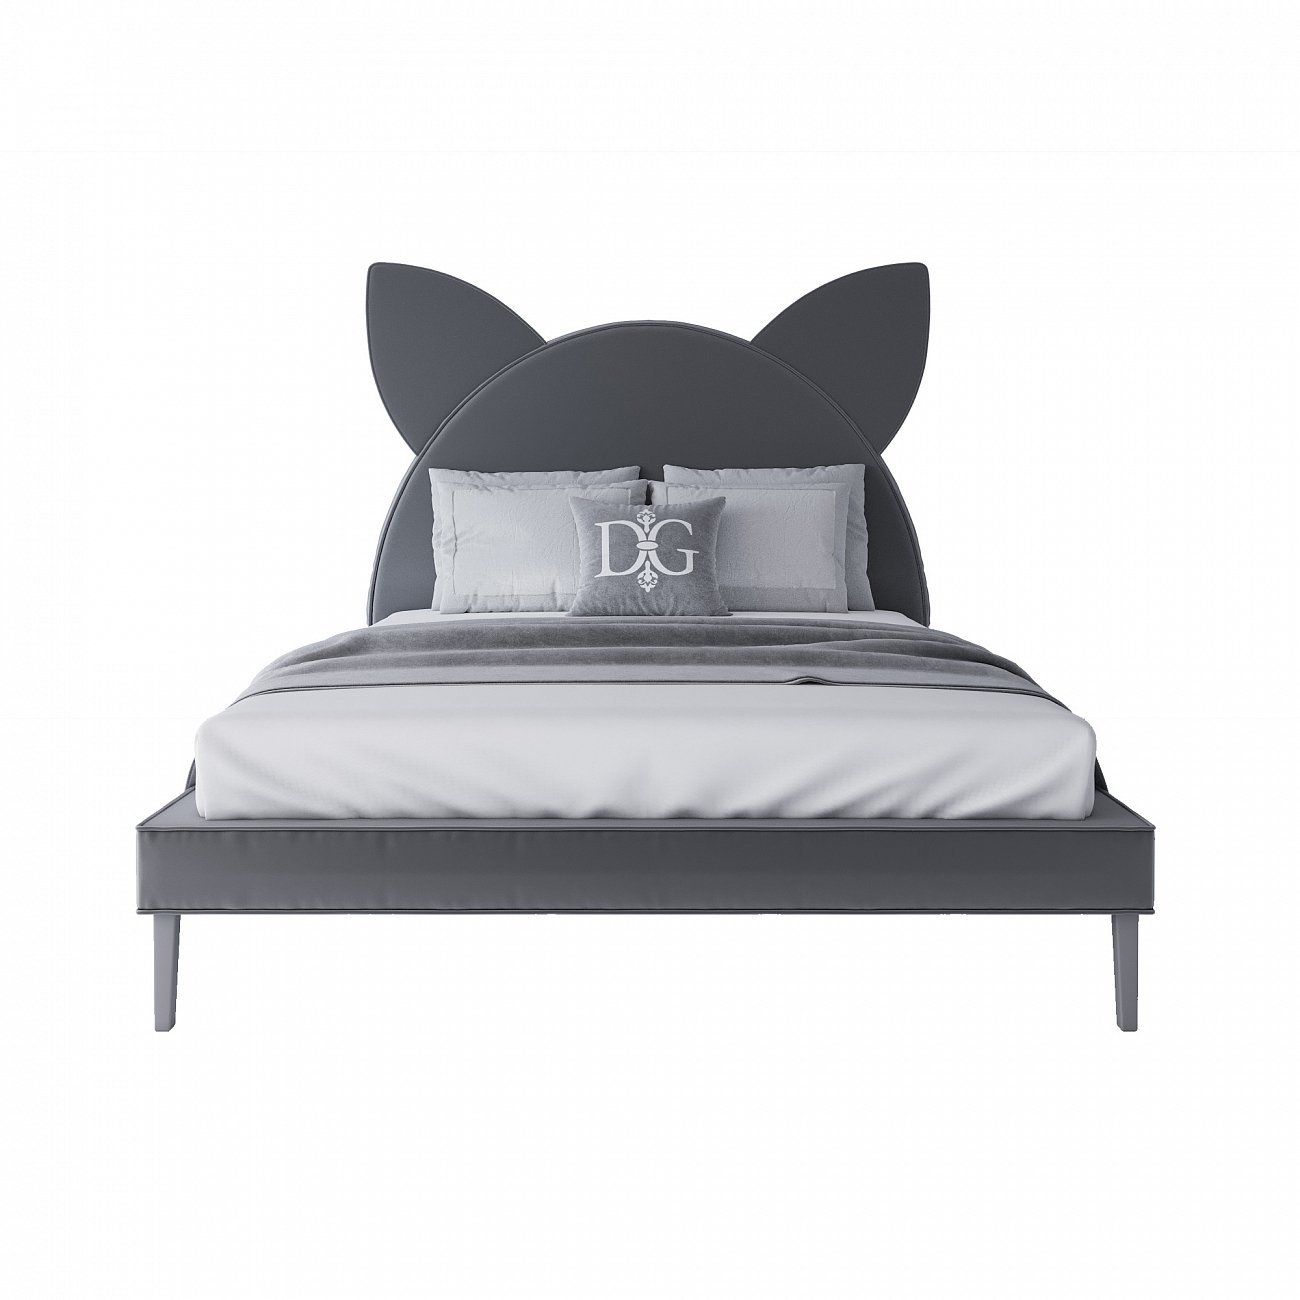 Double bed 160x200 grey Kitty